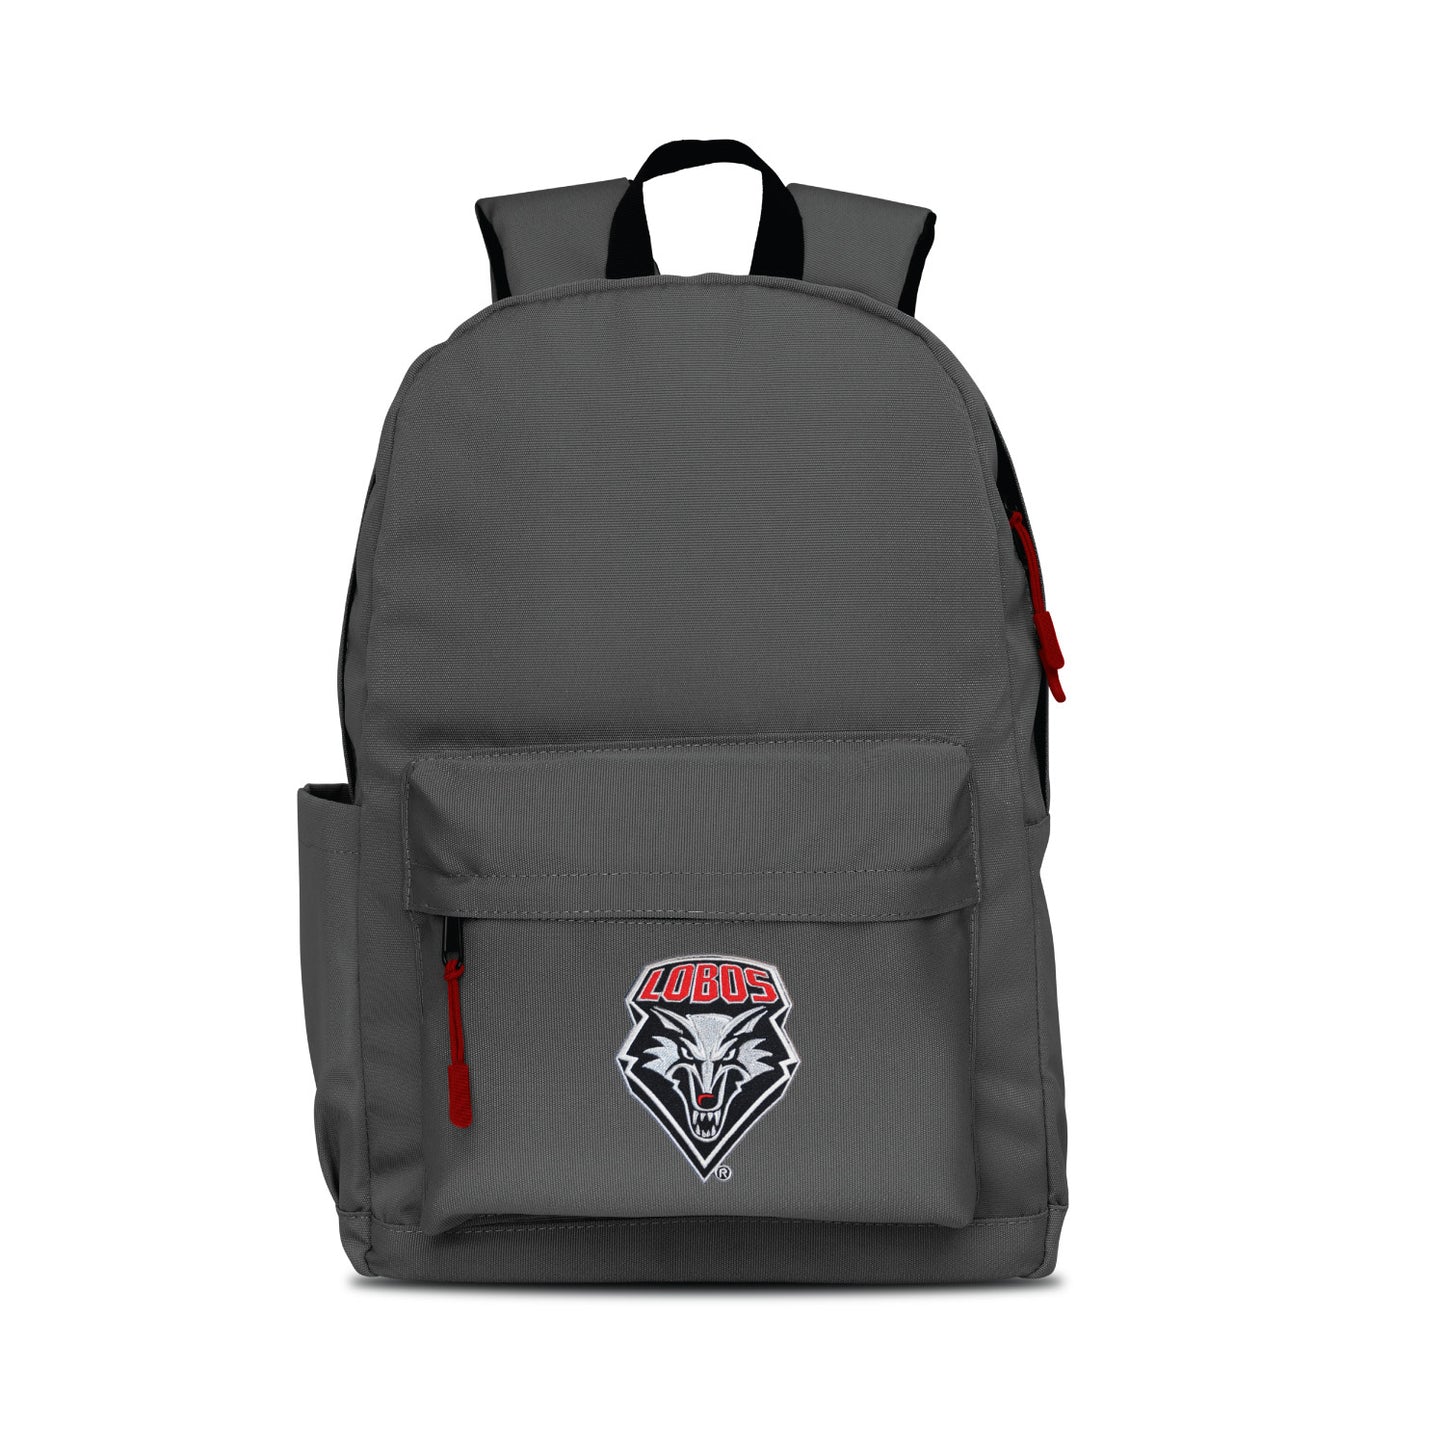 New Mexico Lobos Campus Laptop Backpack- Gray